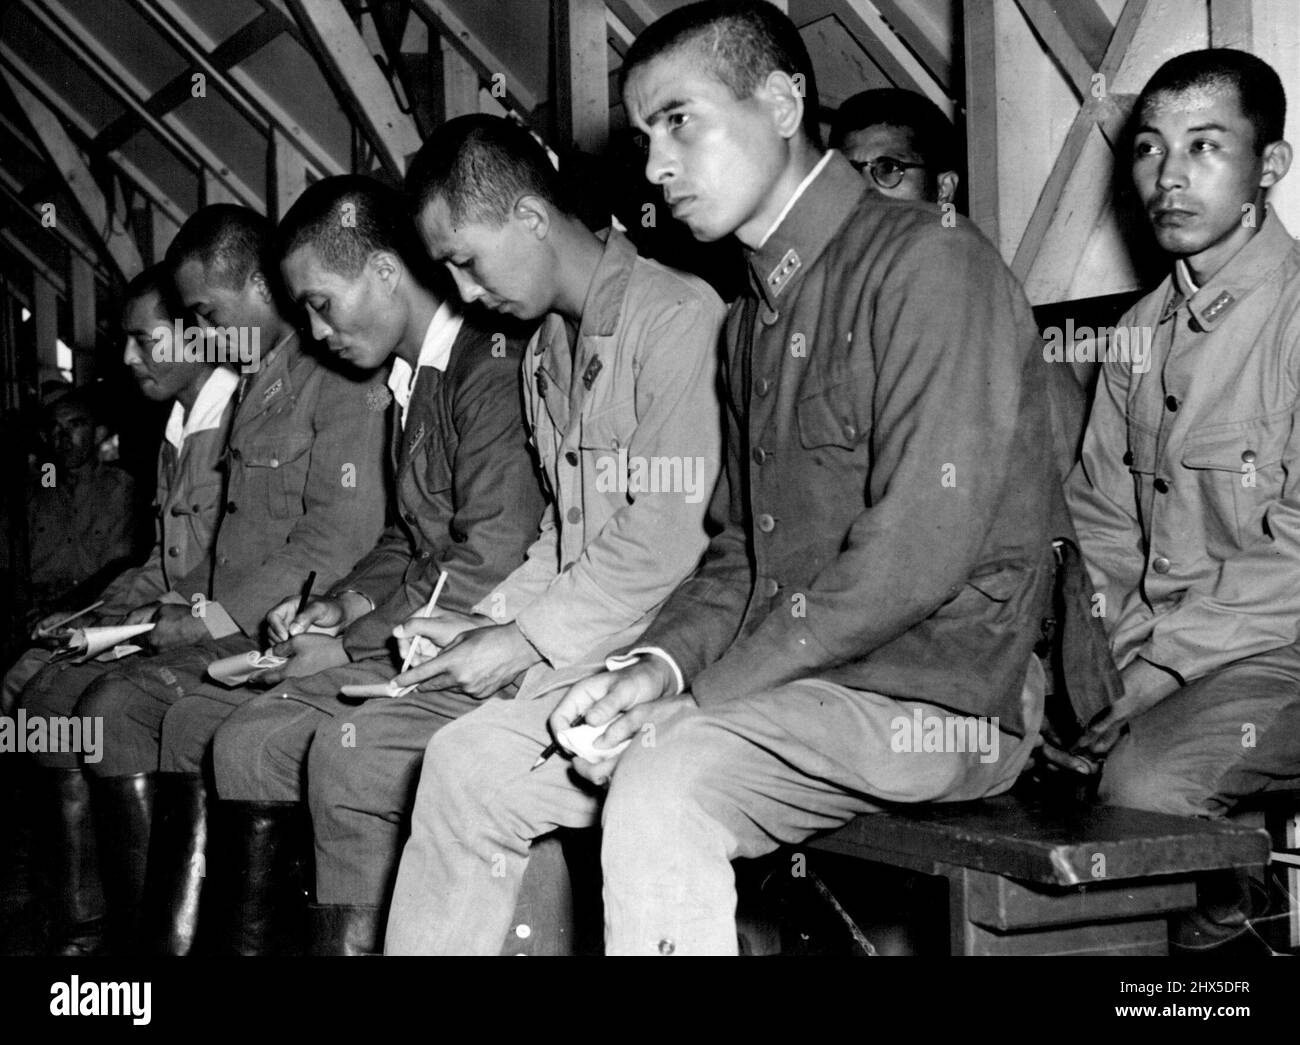 Japanese War Criminals Trials at Darwin. Japanese, on trial in the war crimes court at Darwin, make notes while charges are read. Striking picture of the Japanese on trial at Darwin for atrocities committed on Australians in Timor. They scribble notes as the prosecutor outlines the charges. March 04, 1946. (Photo by Australian Official Photograph). Stock Photo